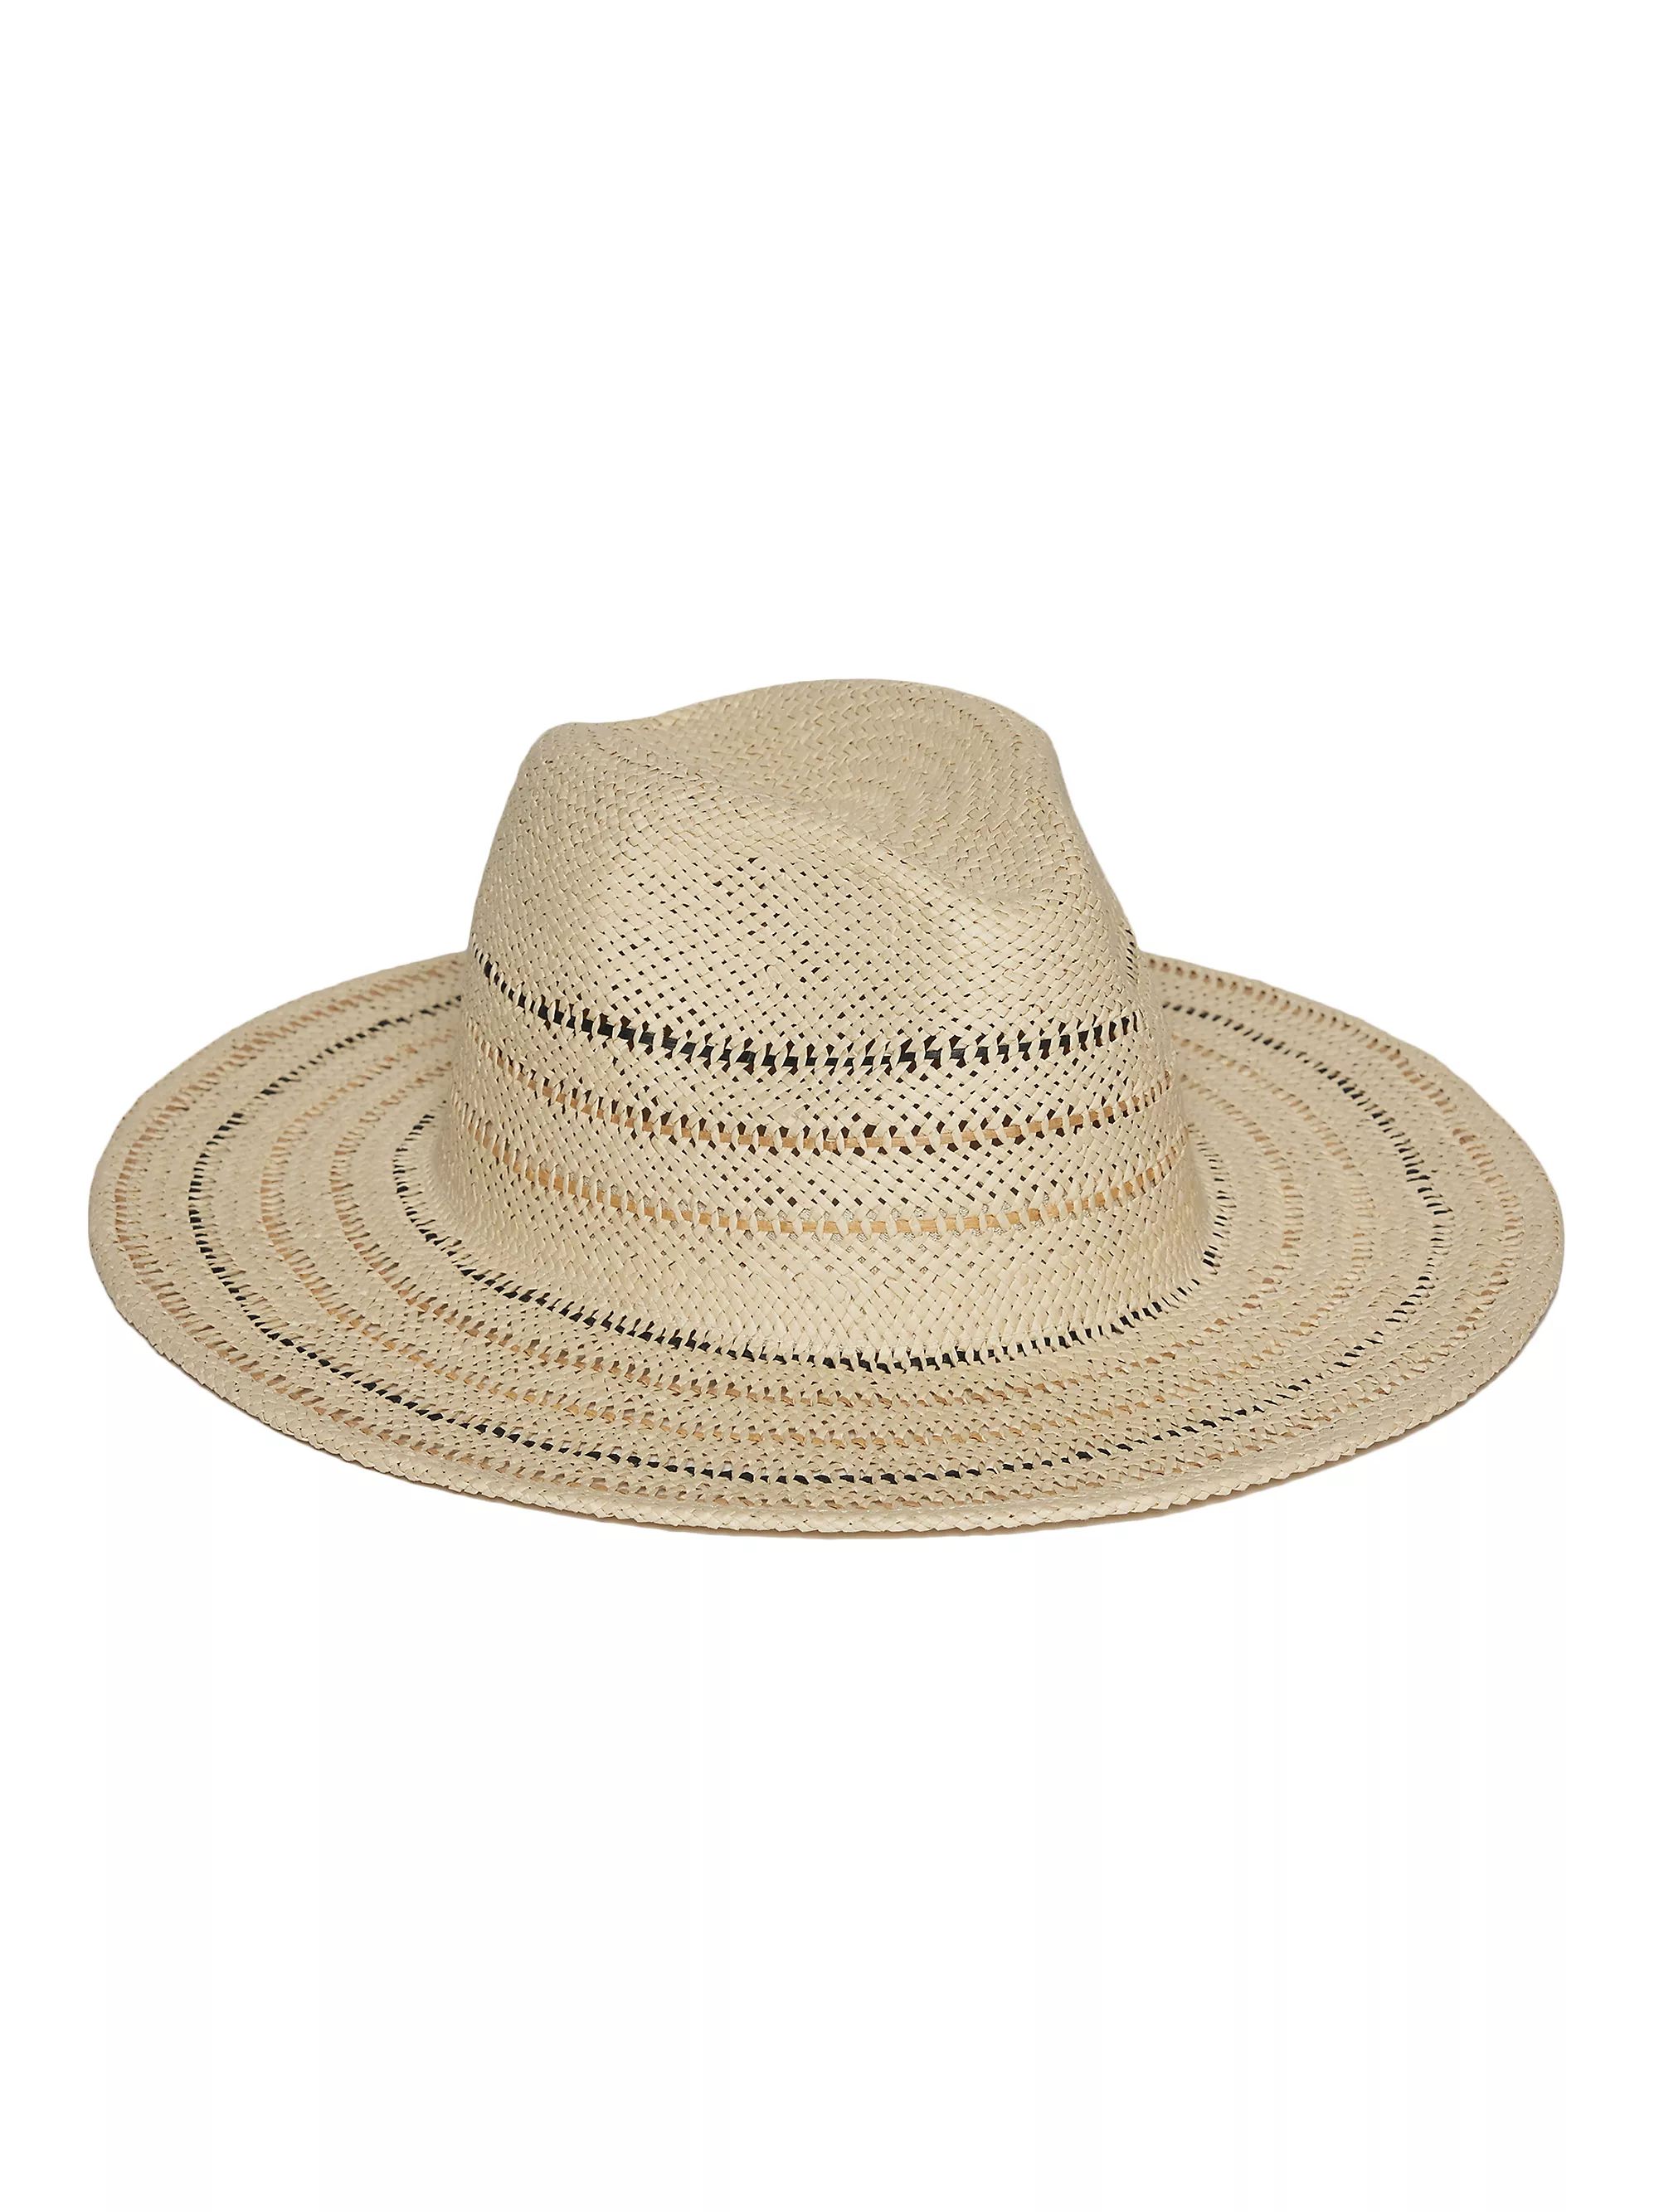 Ibiza Packable Straw Hat | Saks Fifth Avenue